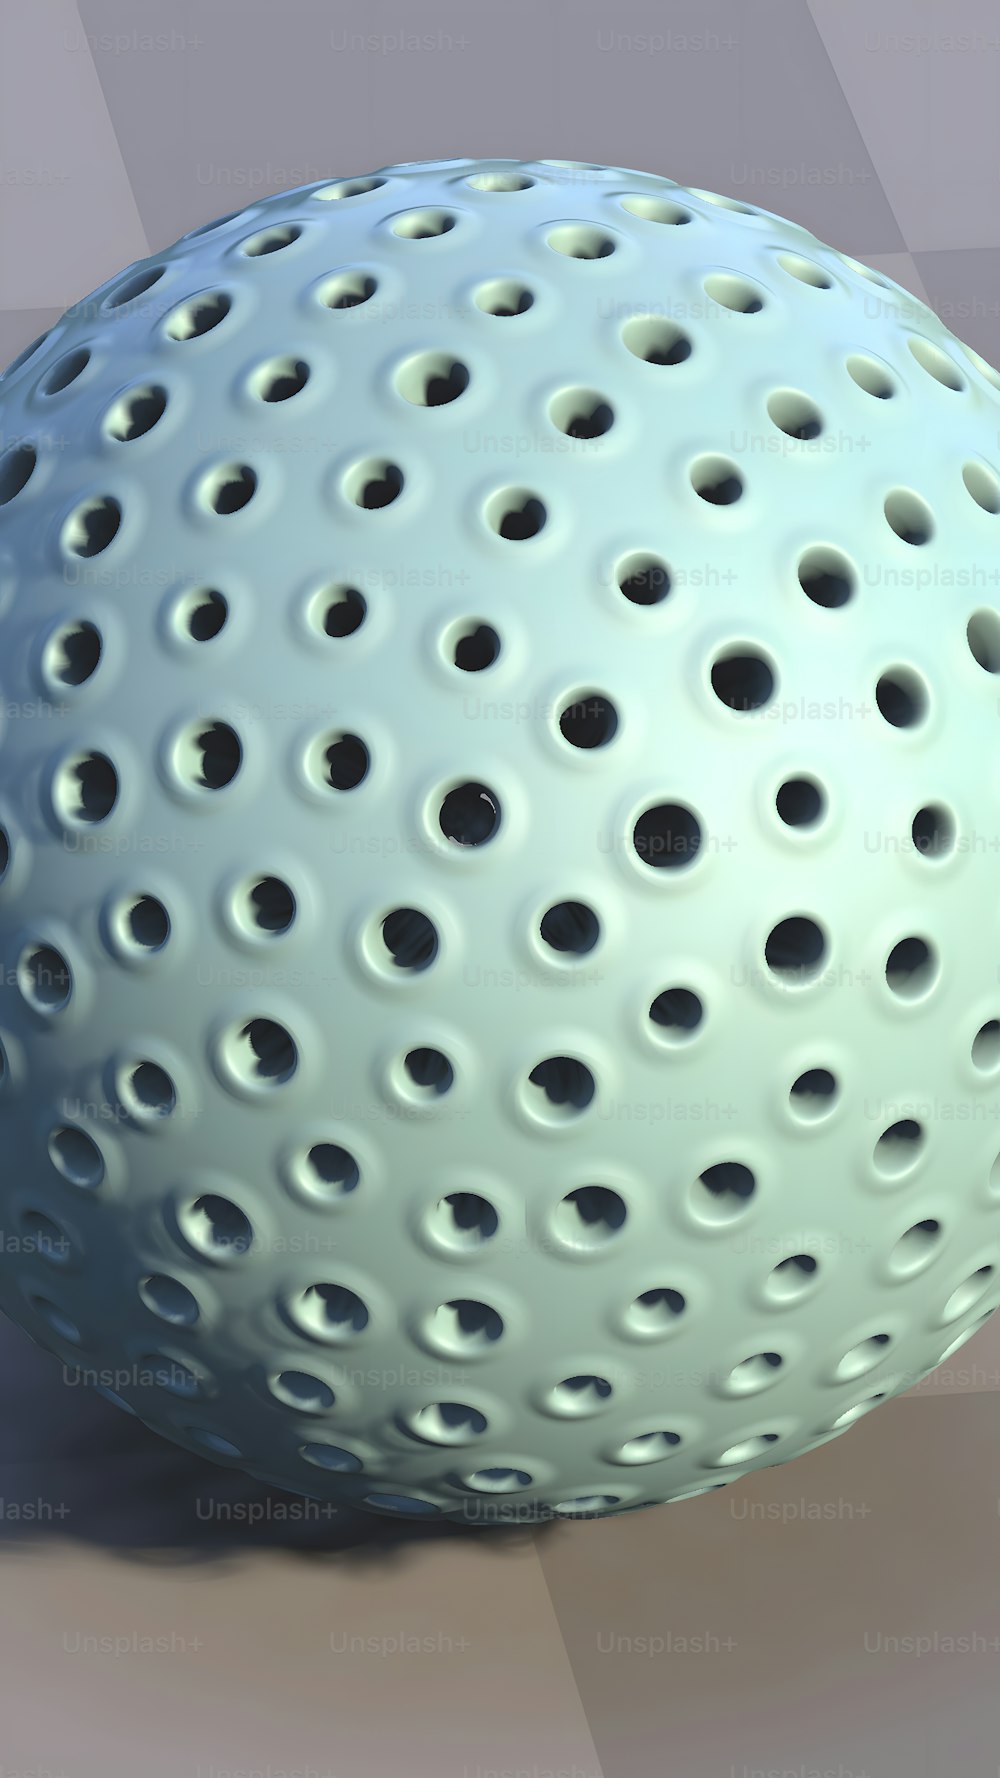 a close up of a white ball with holes on it